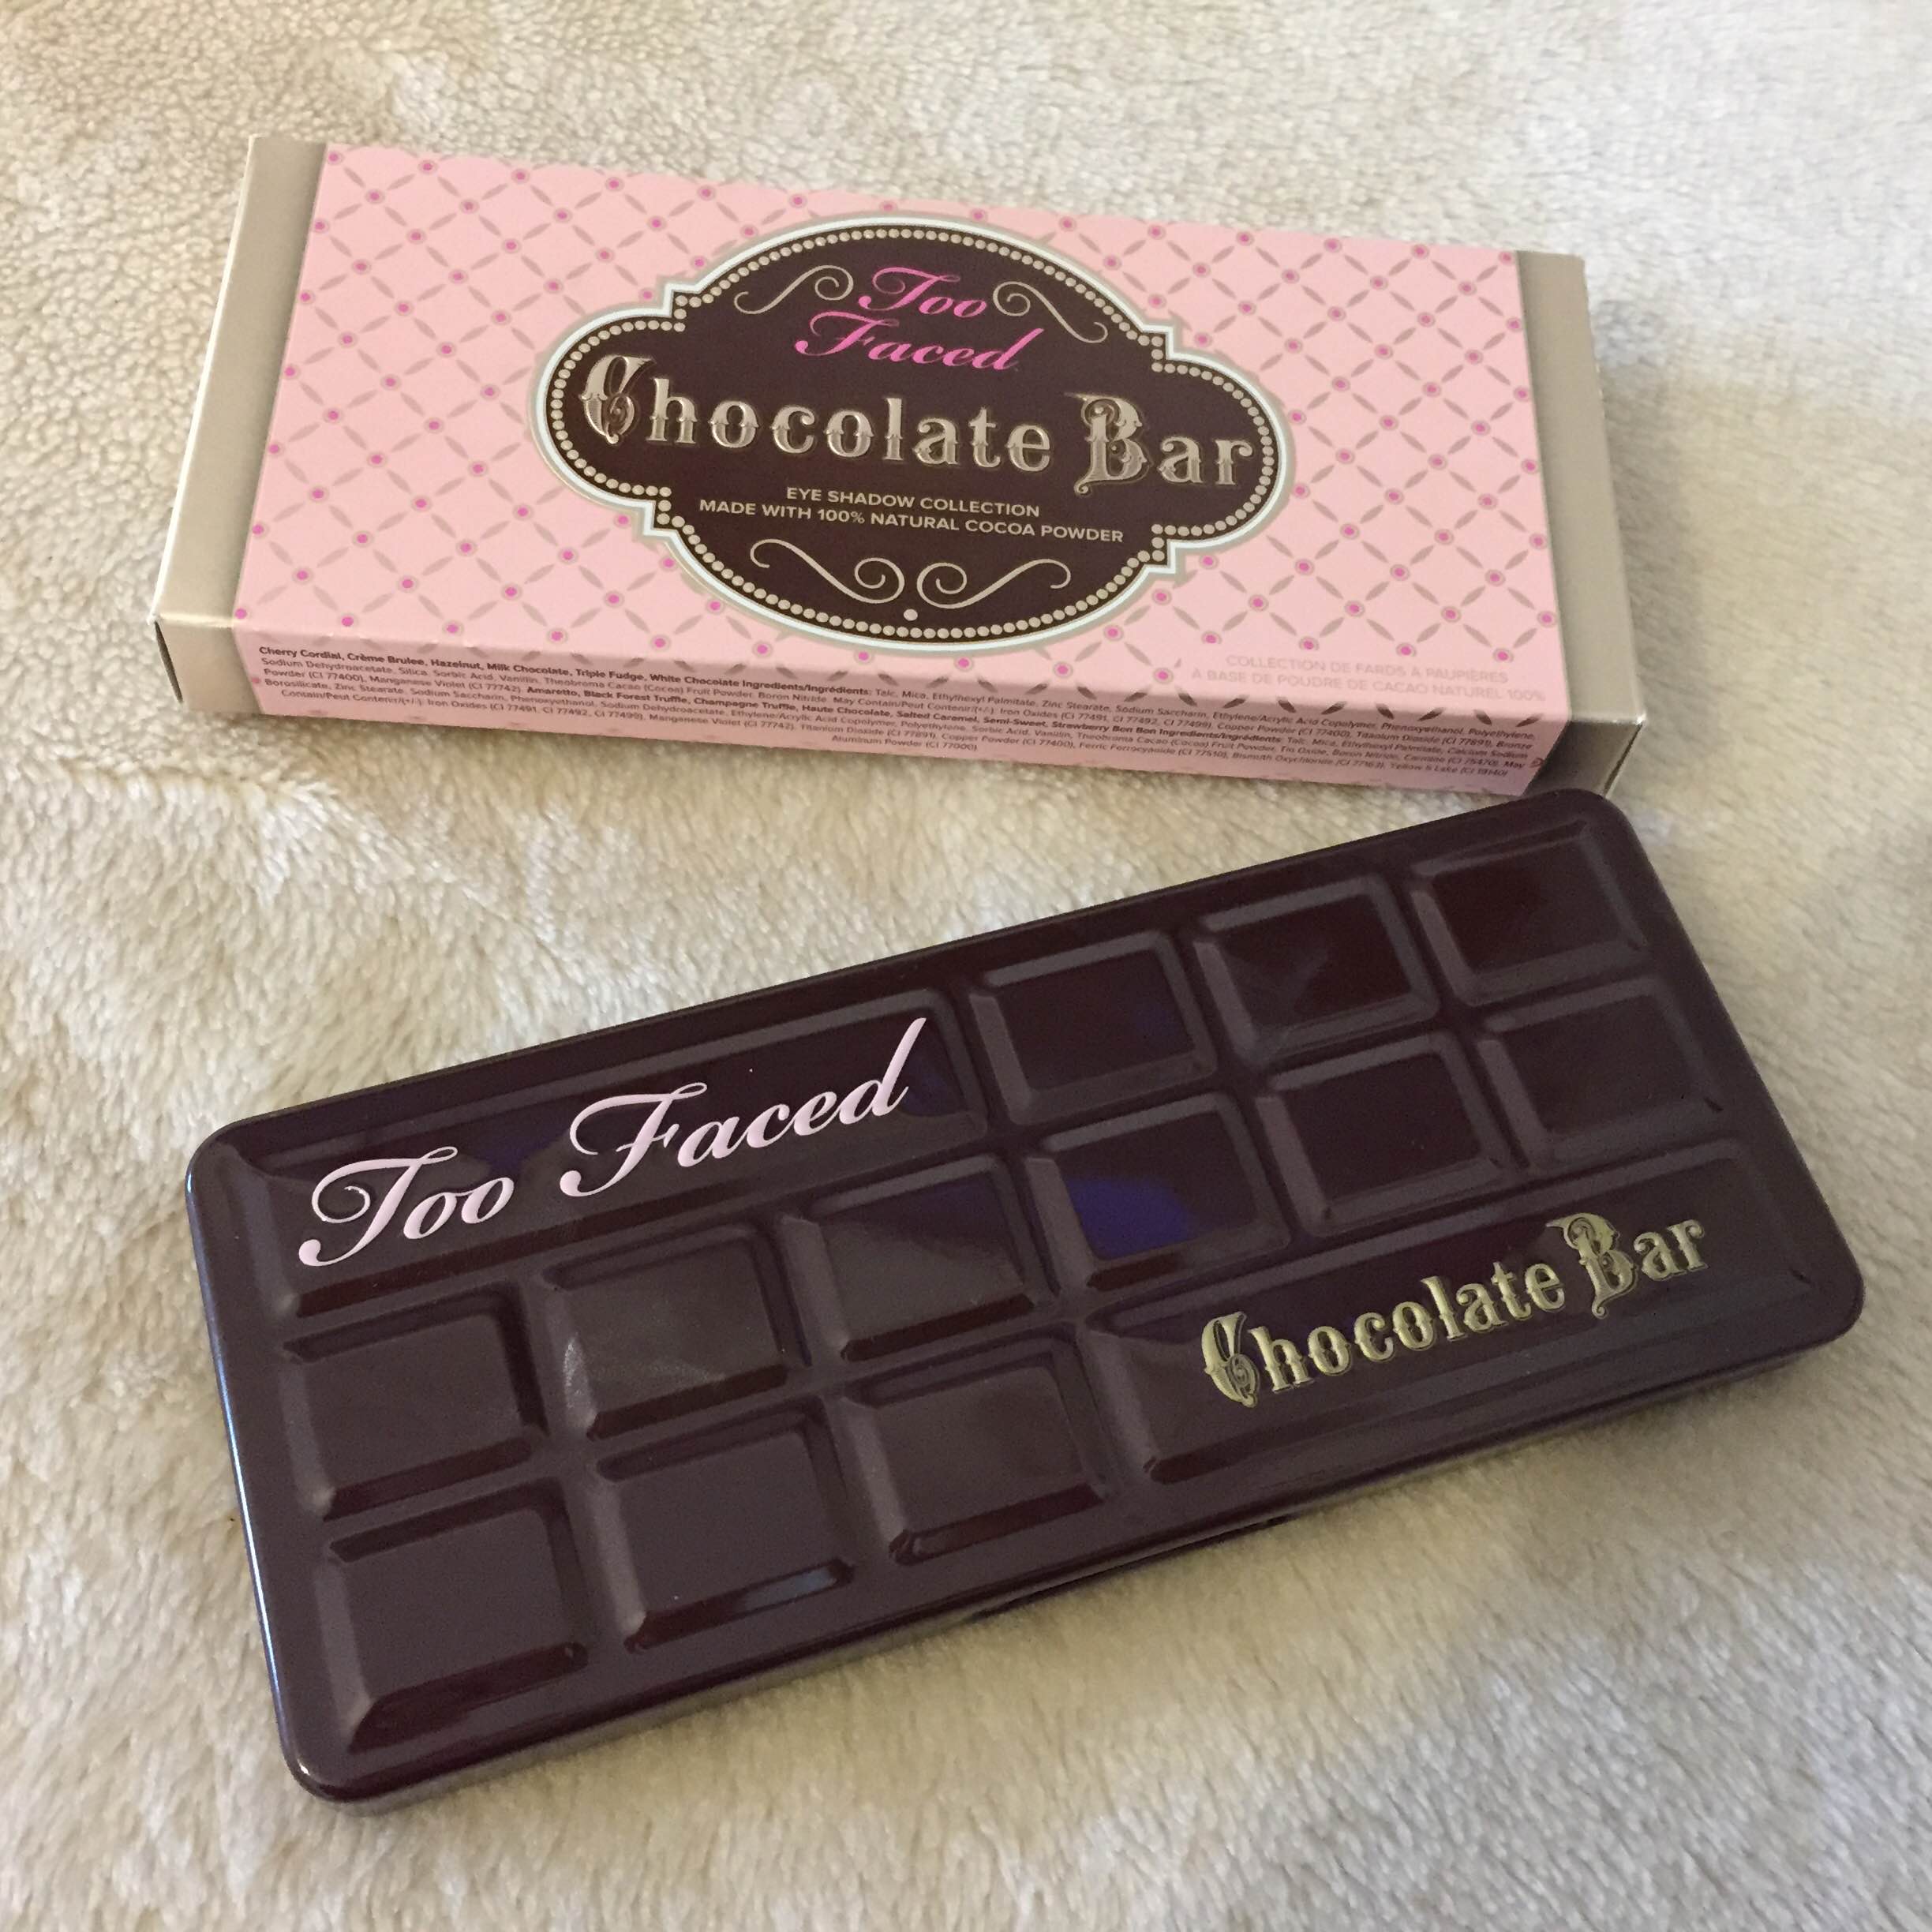 Comment To Win The Chocolate Bar Palette And A Galery Of Better Than Sex Mascara By Too Faced Cosmetics